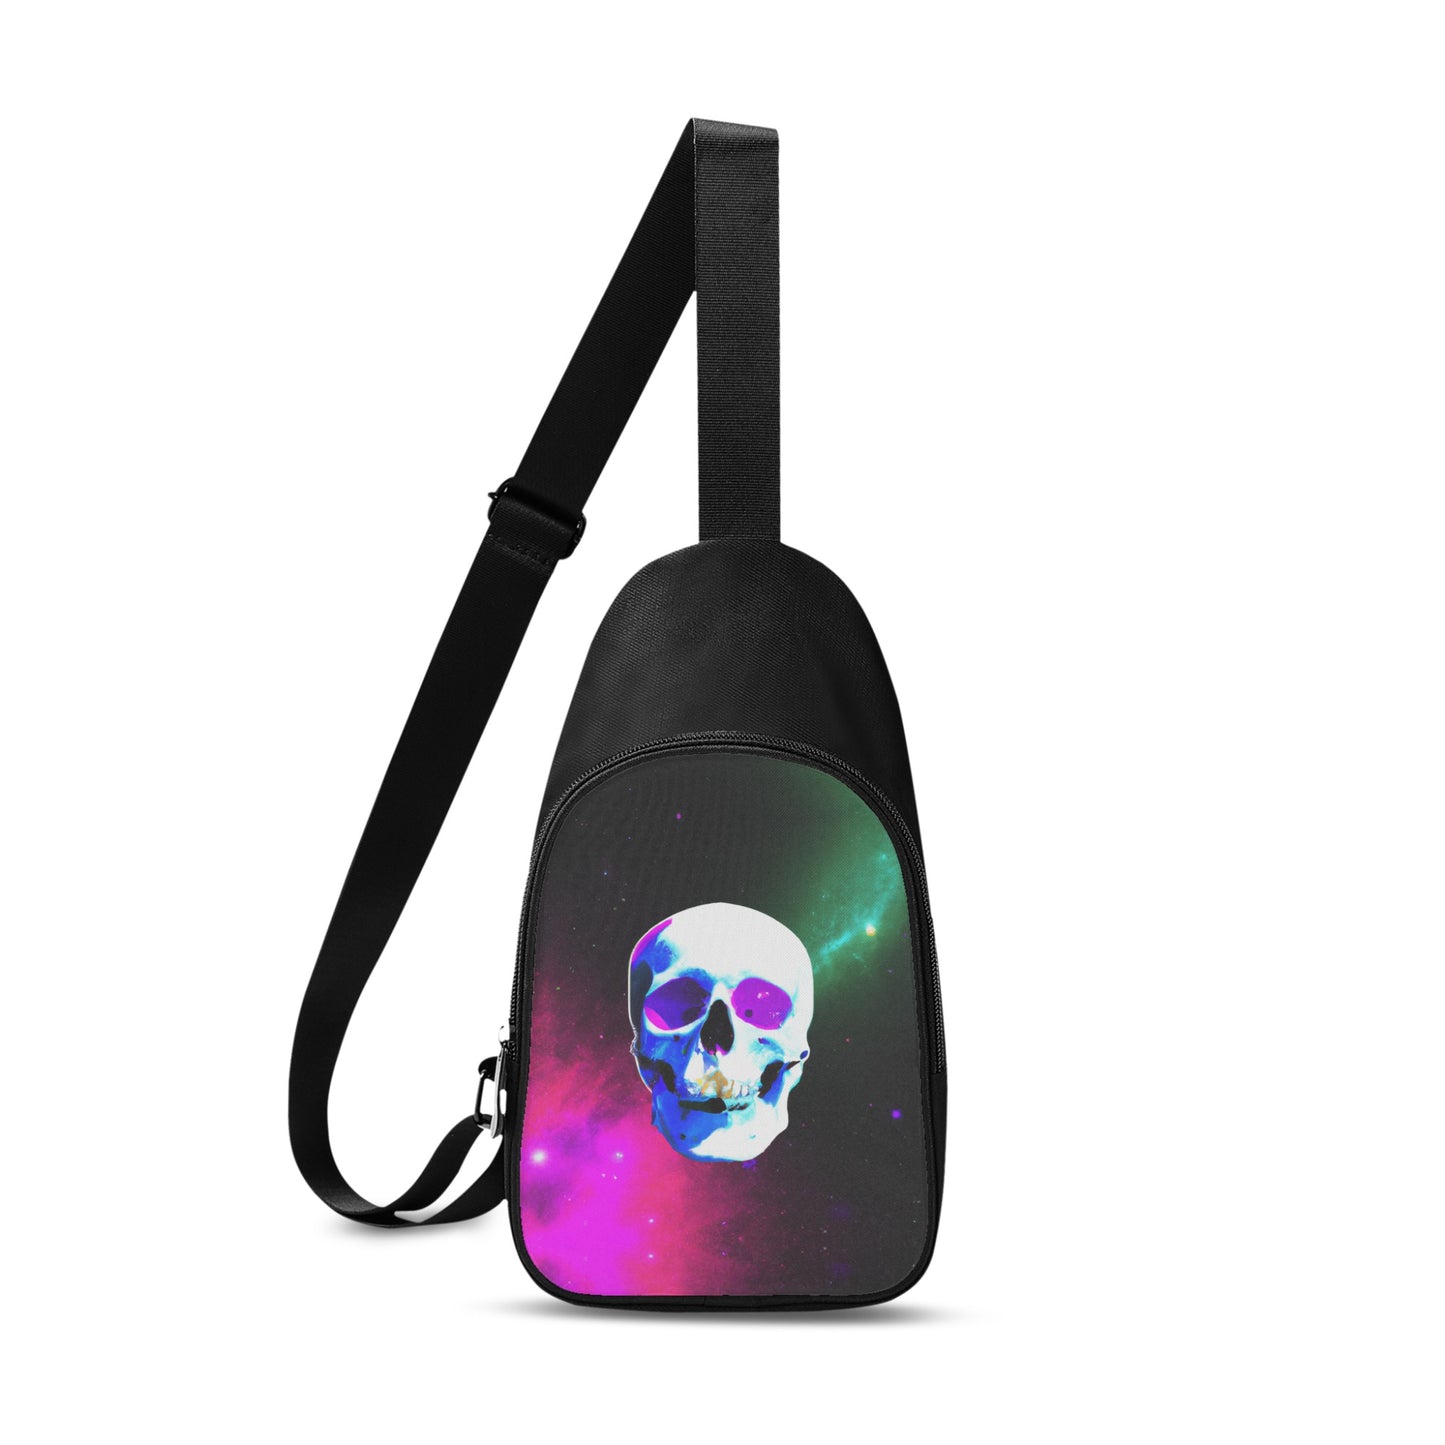 The Nebula Skull Chest bag is unisex. It has the purple and green lightening nebula graphic with a skull in the middle of it.Looking for a striking cross body bag for your fit?  Here it is. The Nebula Skull Chest bag is unisex and features a super cool digitally printed design of a skull in space on the front of the bag.